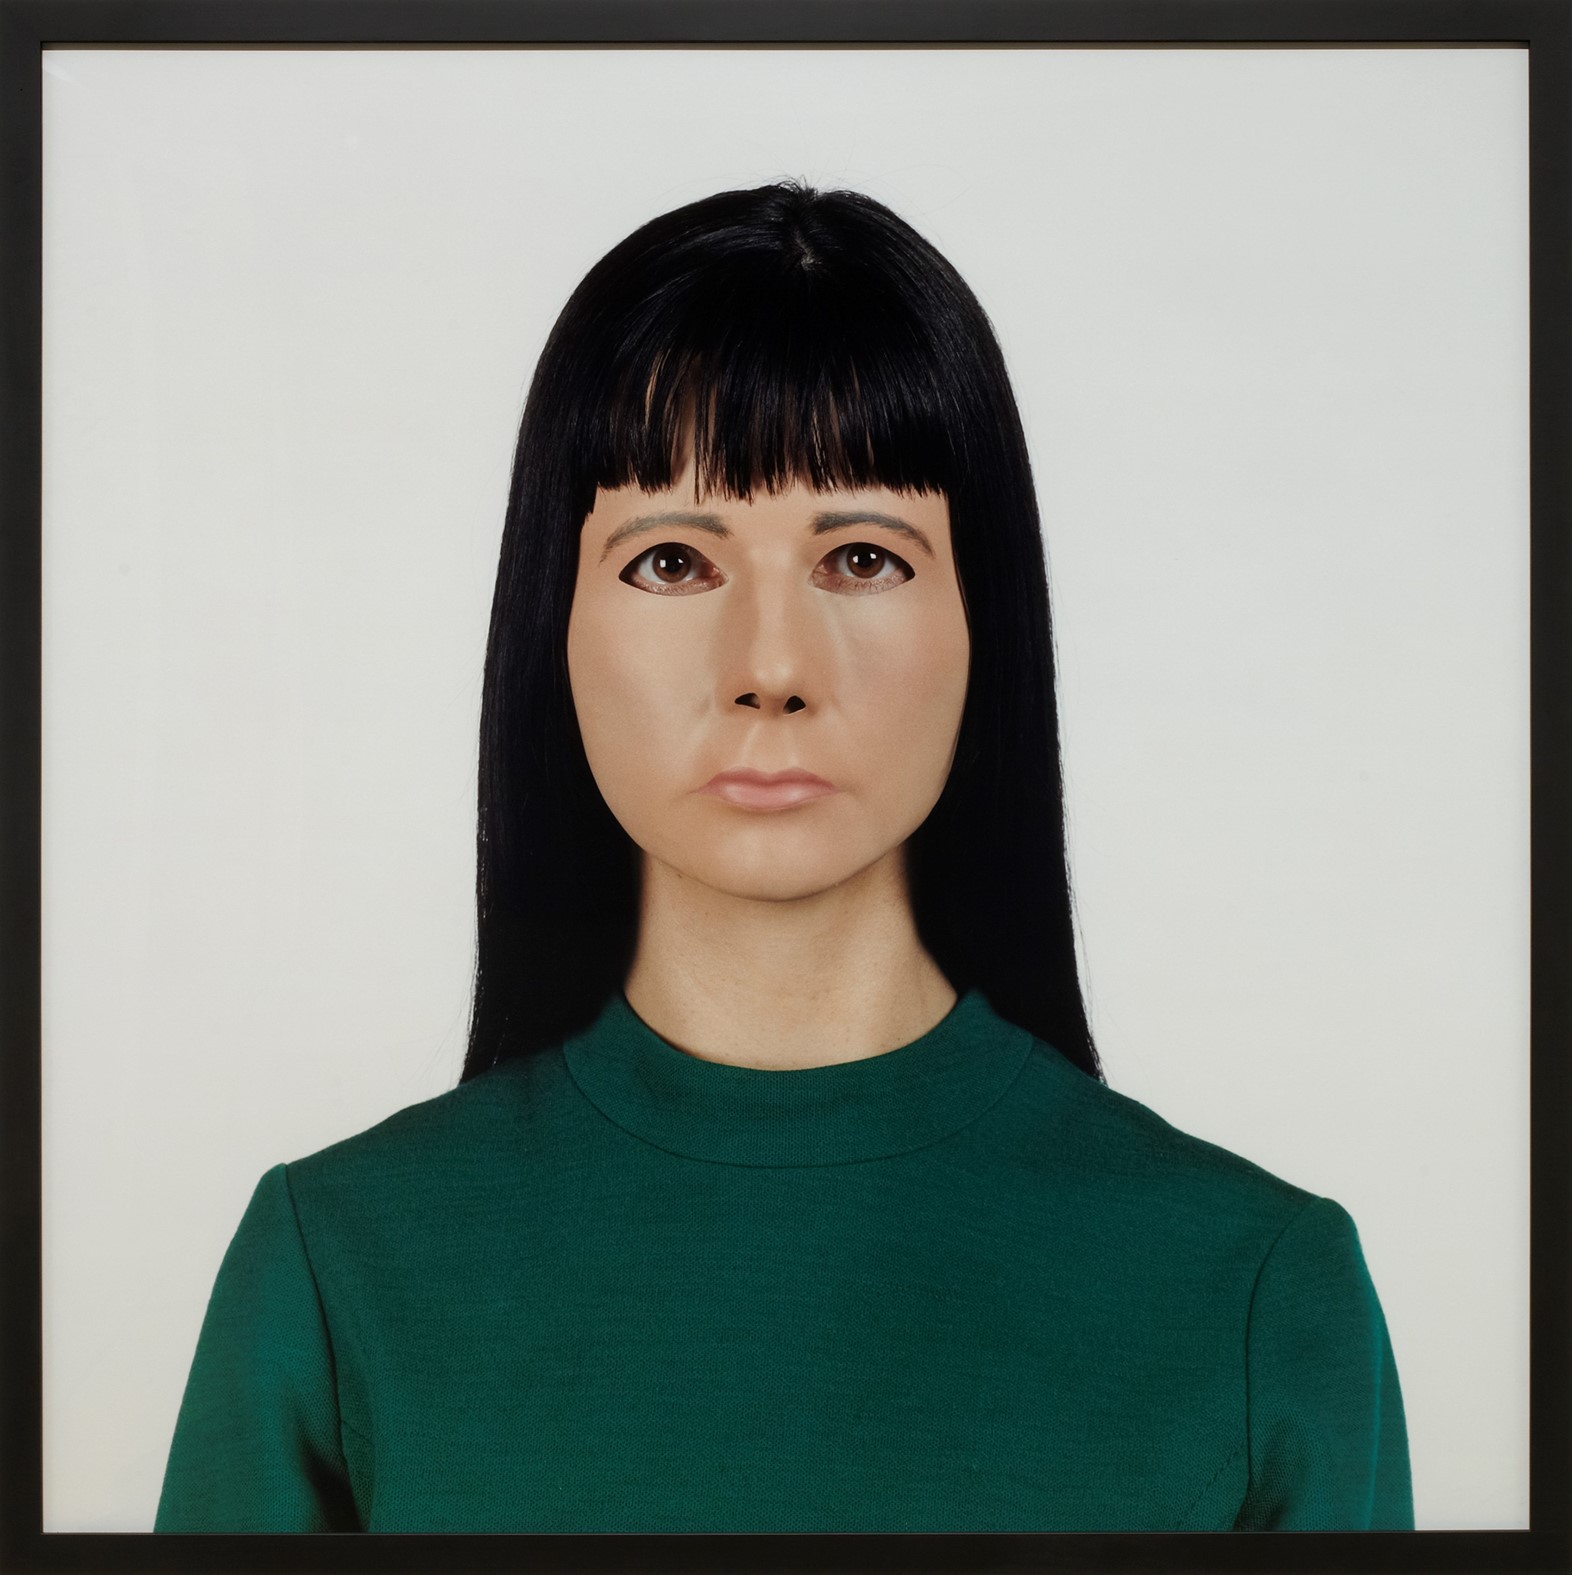 Gillian Wearing on masks, inhabiting disguises, and identity as 